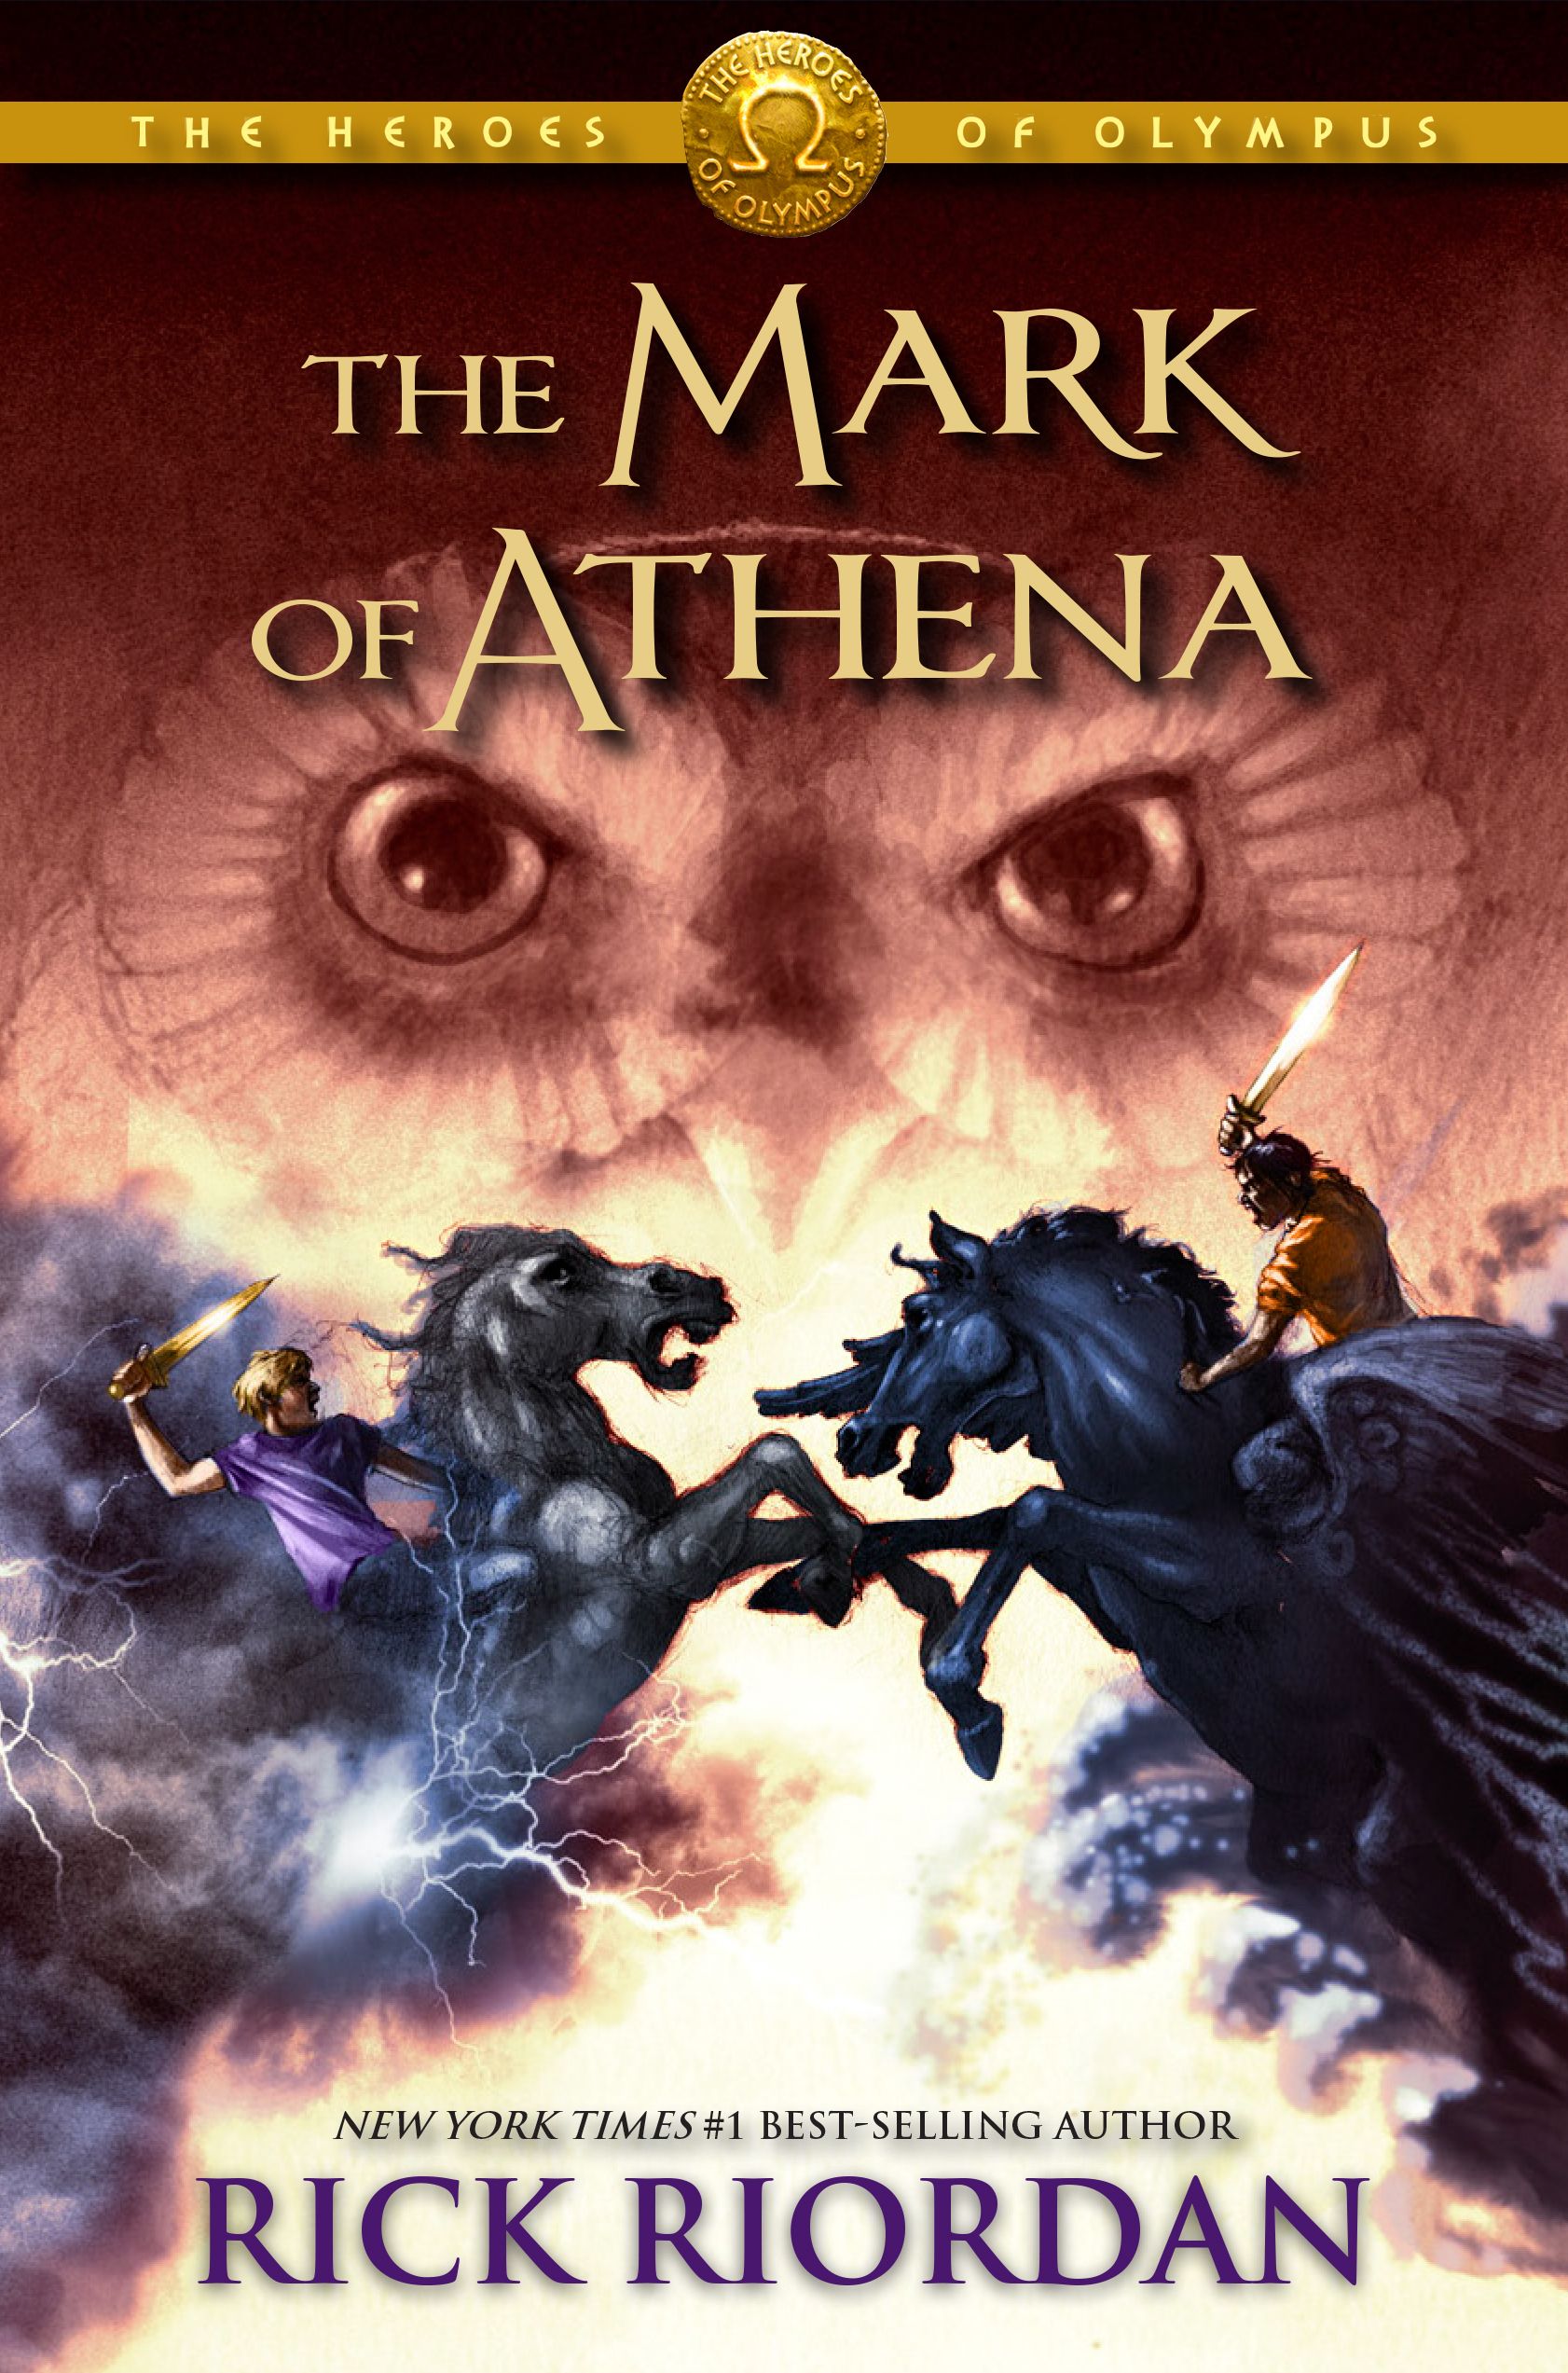 The mark of athena pdf weebly